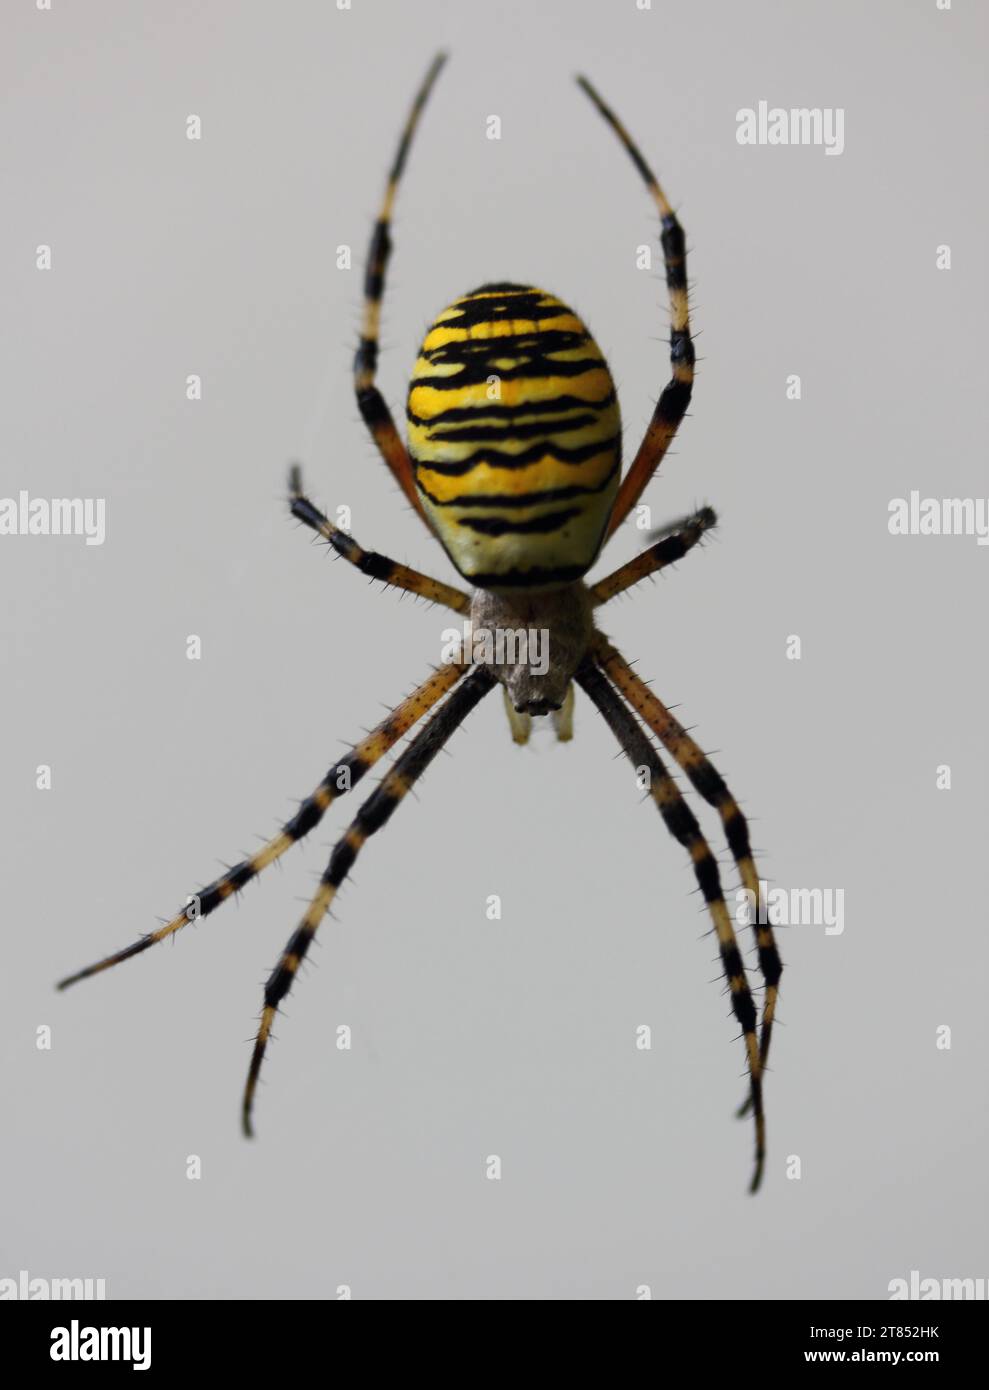 Argiope bruennichi (wasp spider) is a species of orb-web spider distributed throughout central Europe, northern Europe, north Africa, parts of Asia, t Stock Photo